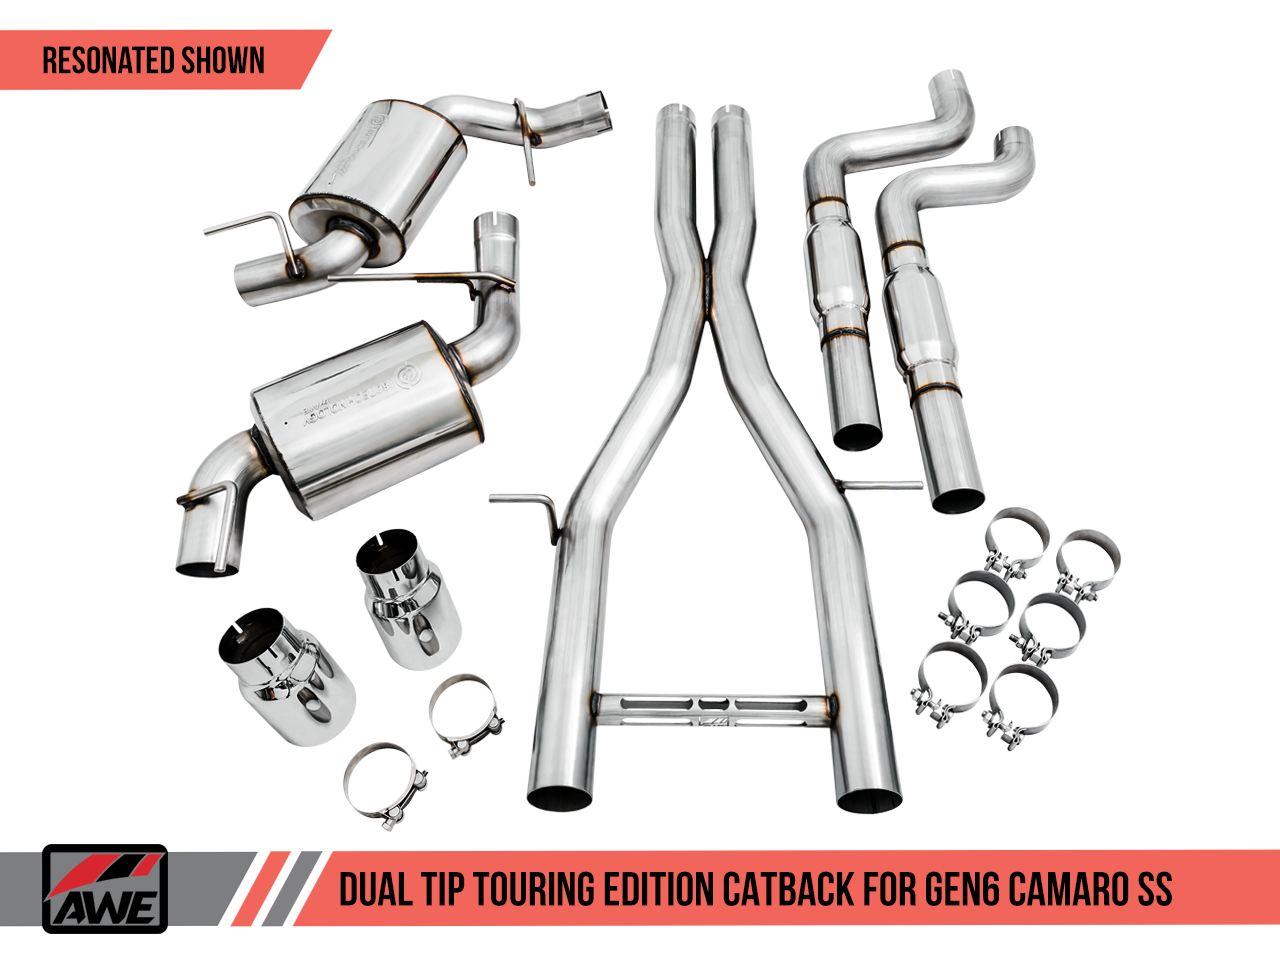 AWE Tuning Touring Edition Catback Exhaust for Gen6 Camaro SS - Non-Resonated - Chrome Silver Tips (Dual Outlet)